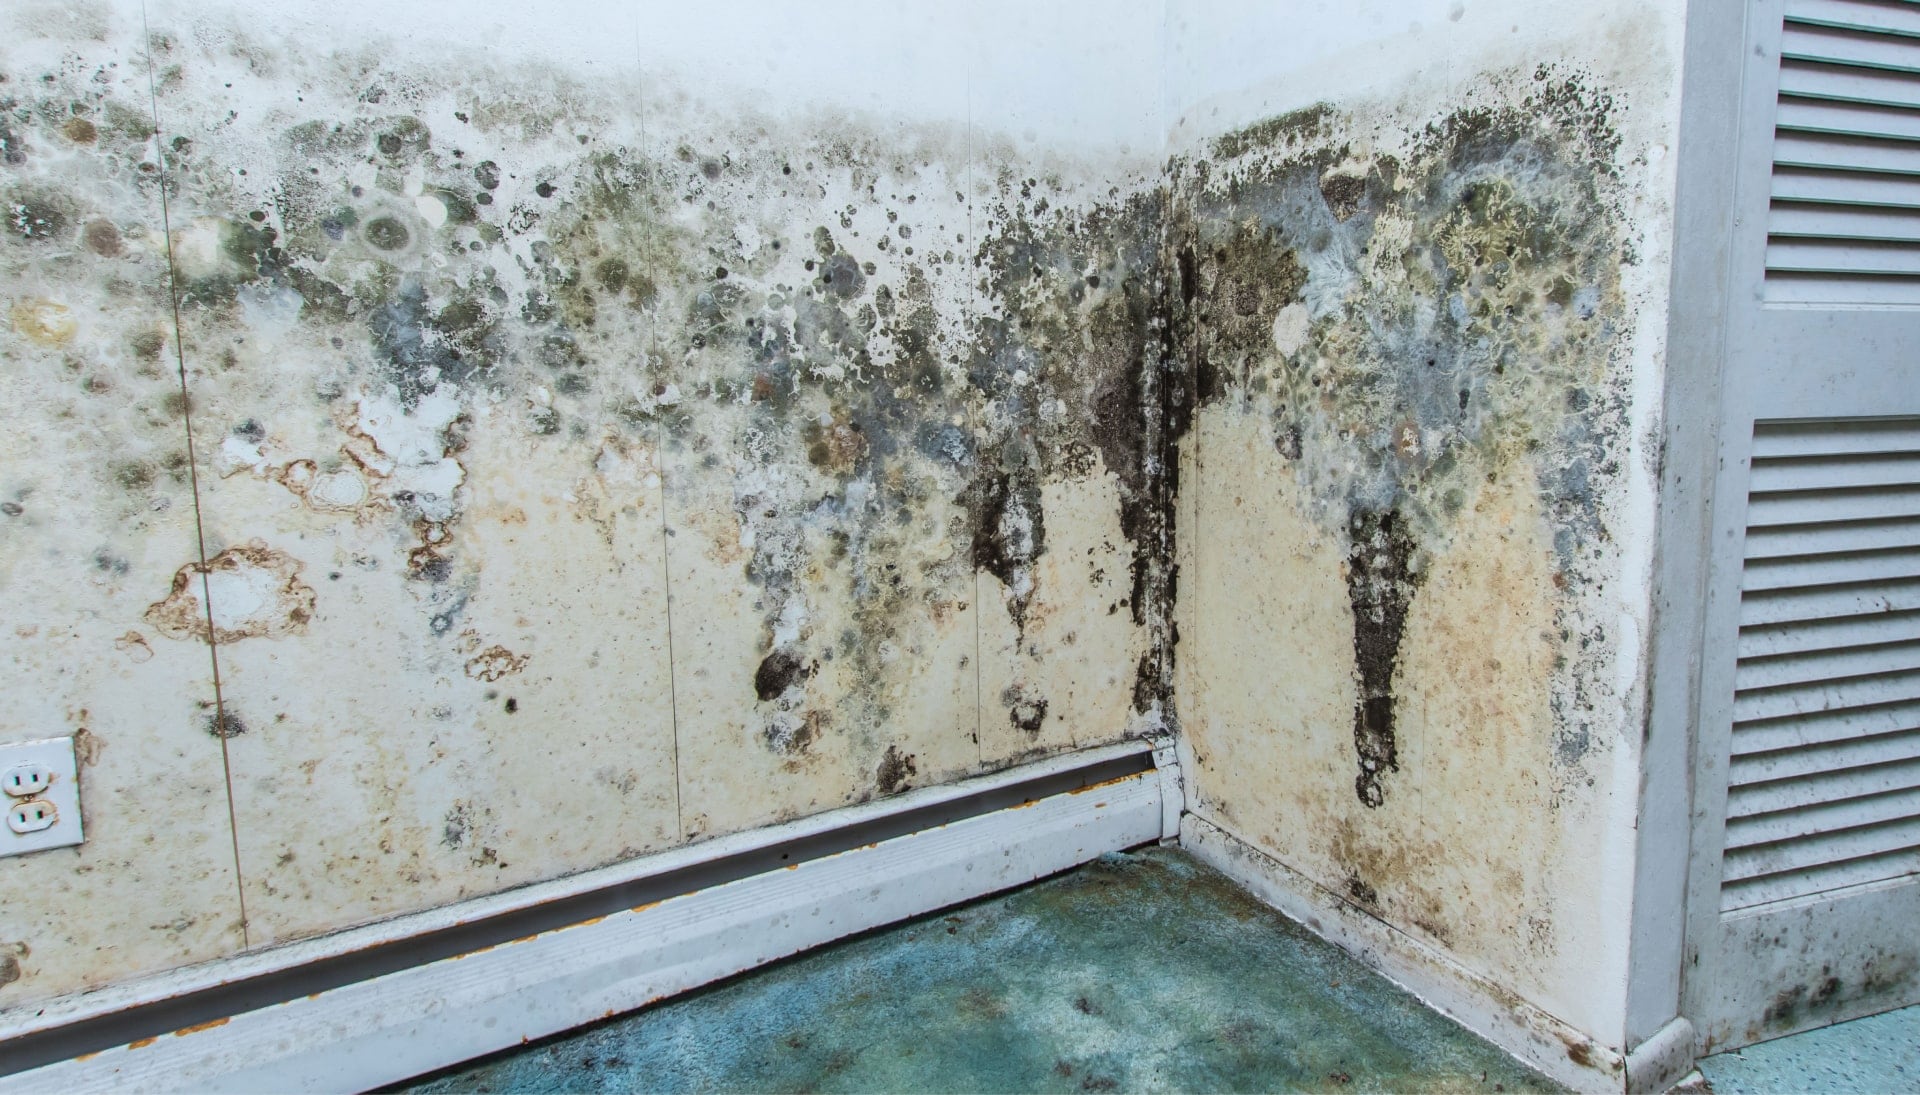 Professional mold removal, odor control, and water damage restoration service in Lexington, Kentucky.